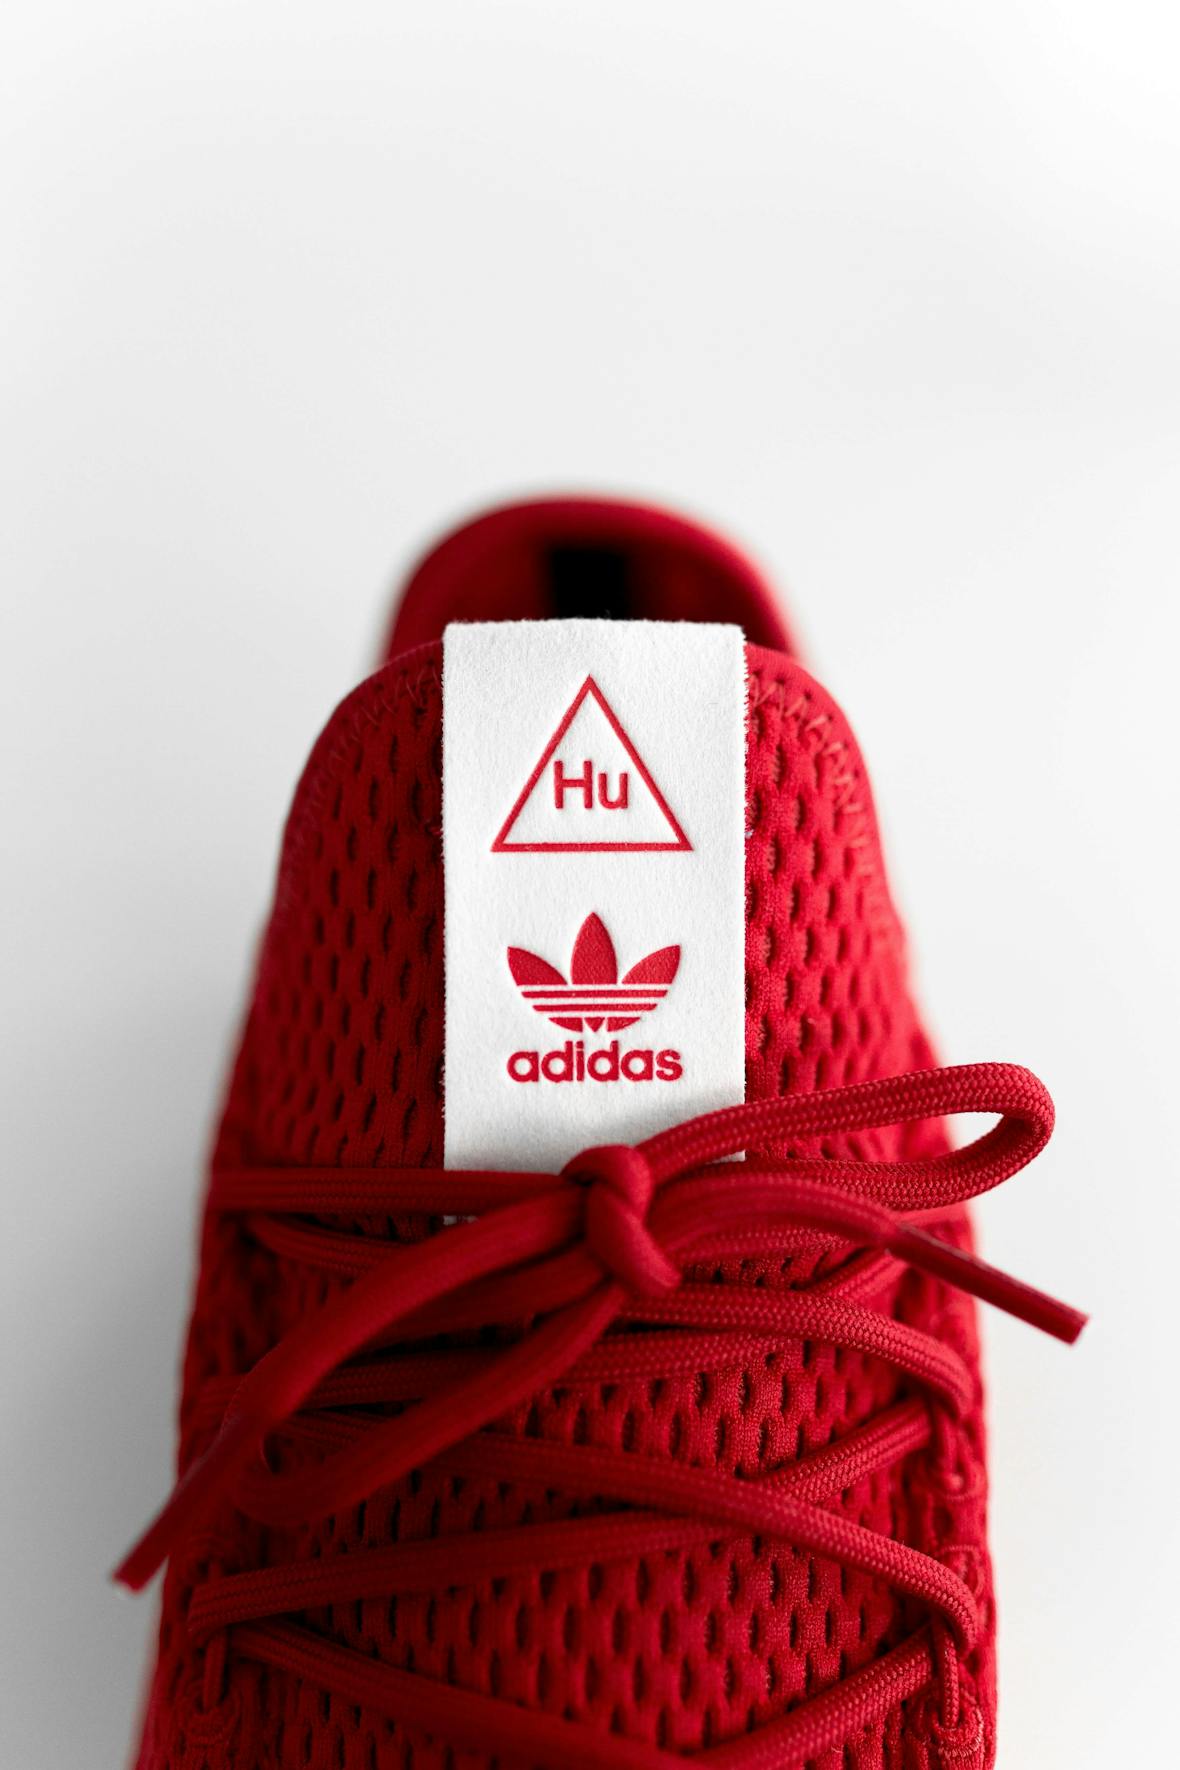 Adidas continues to grow rapidly